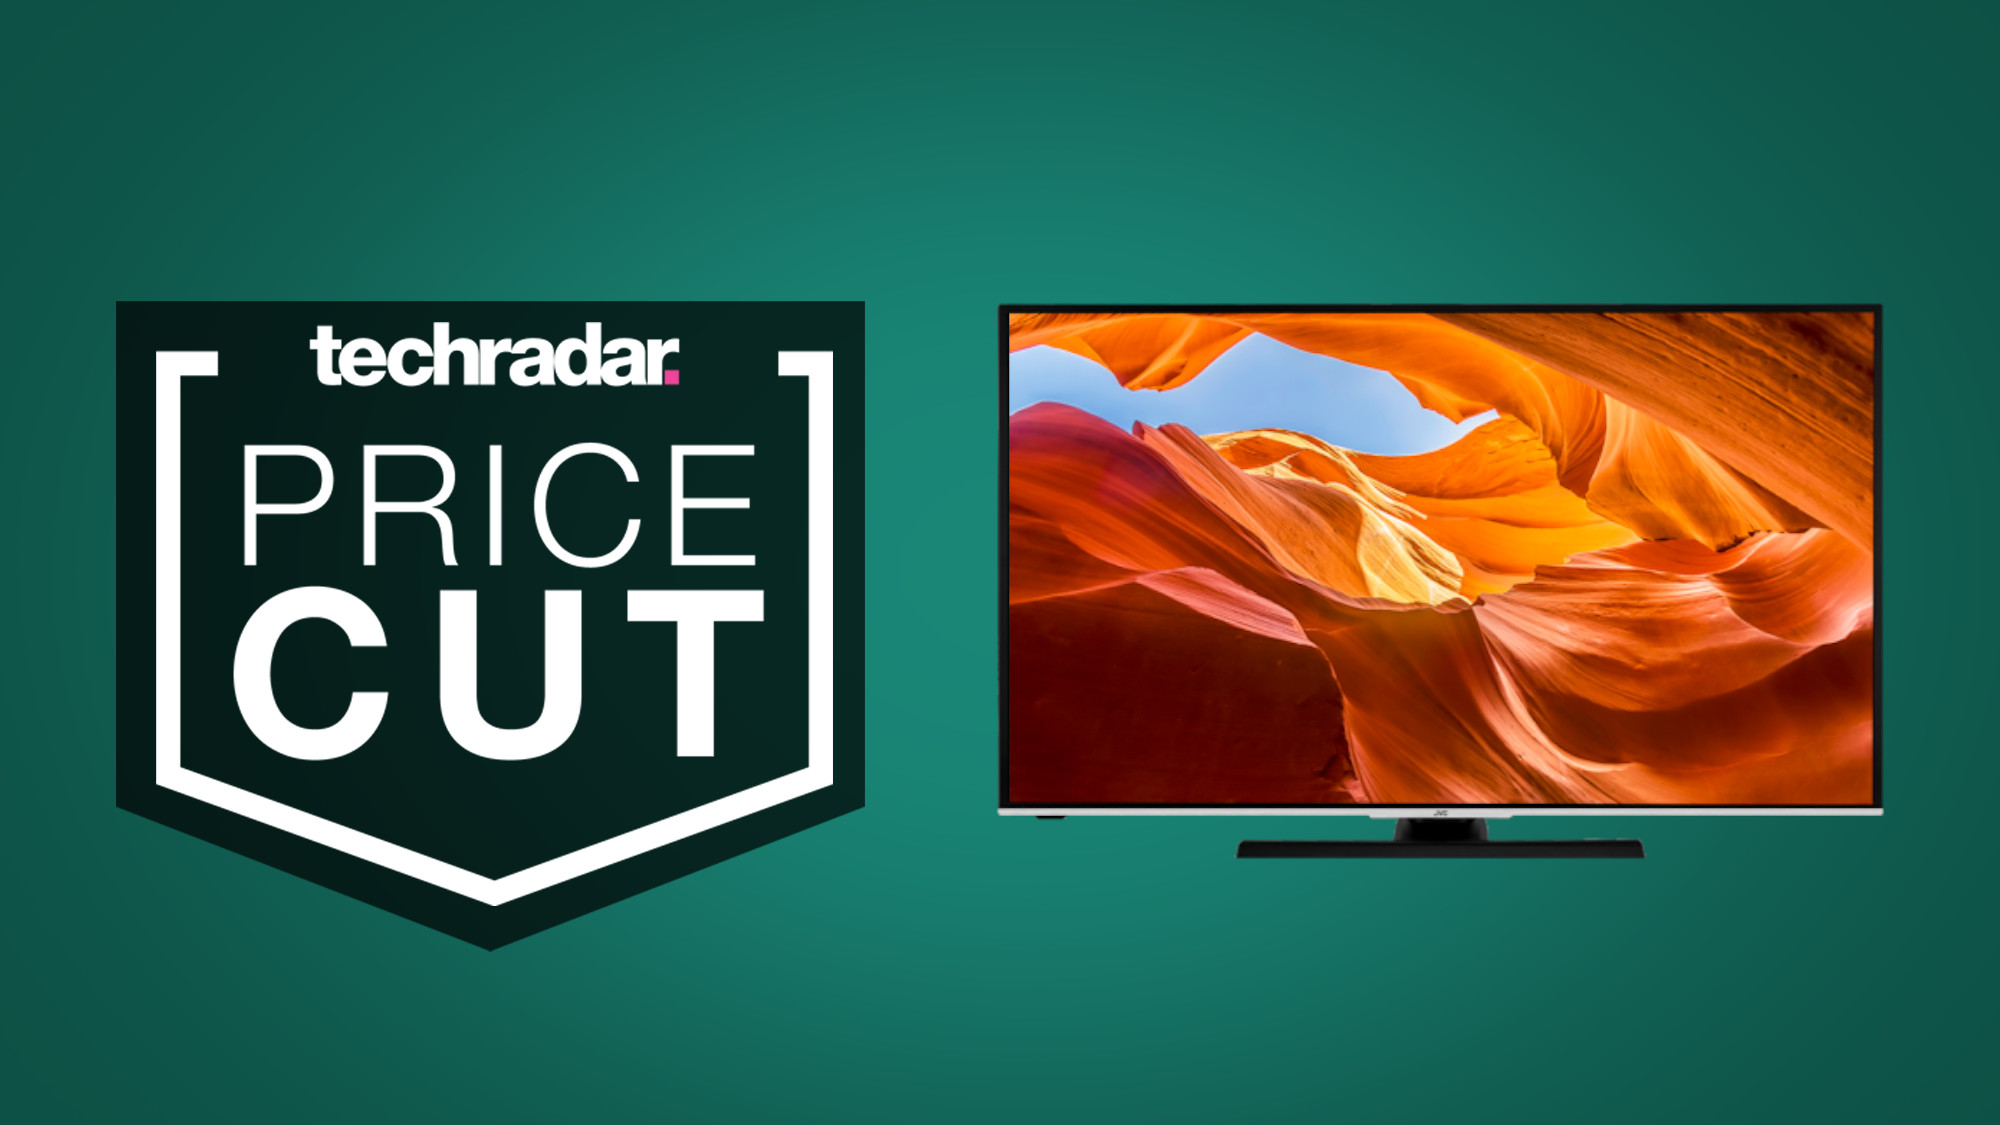 You won't find a better cheap 4K TV than these Currys deals with £100 savings